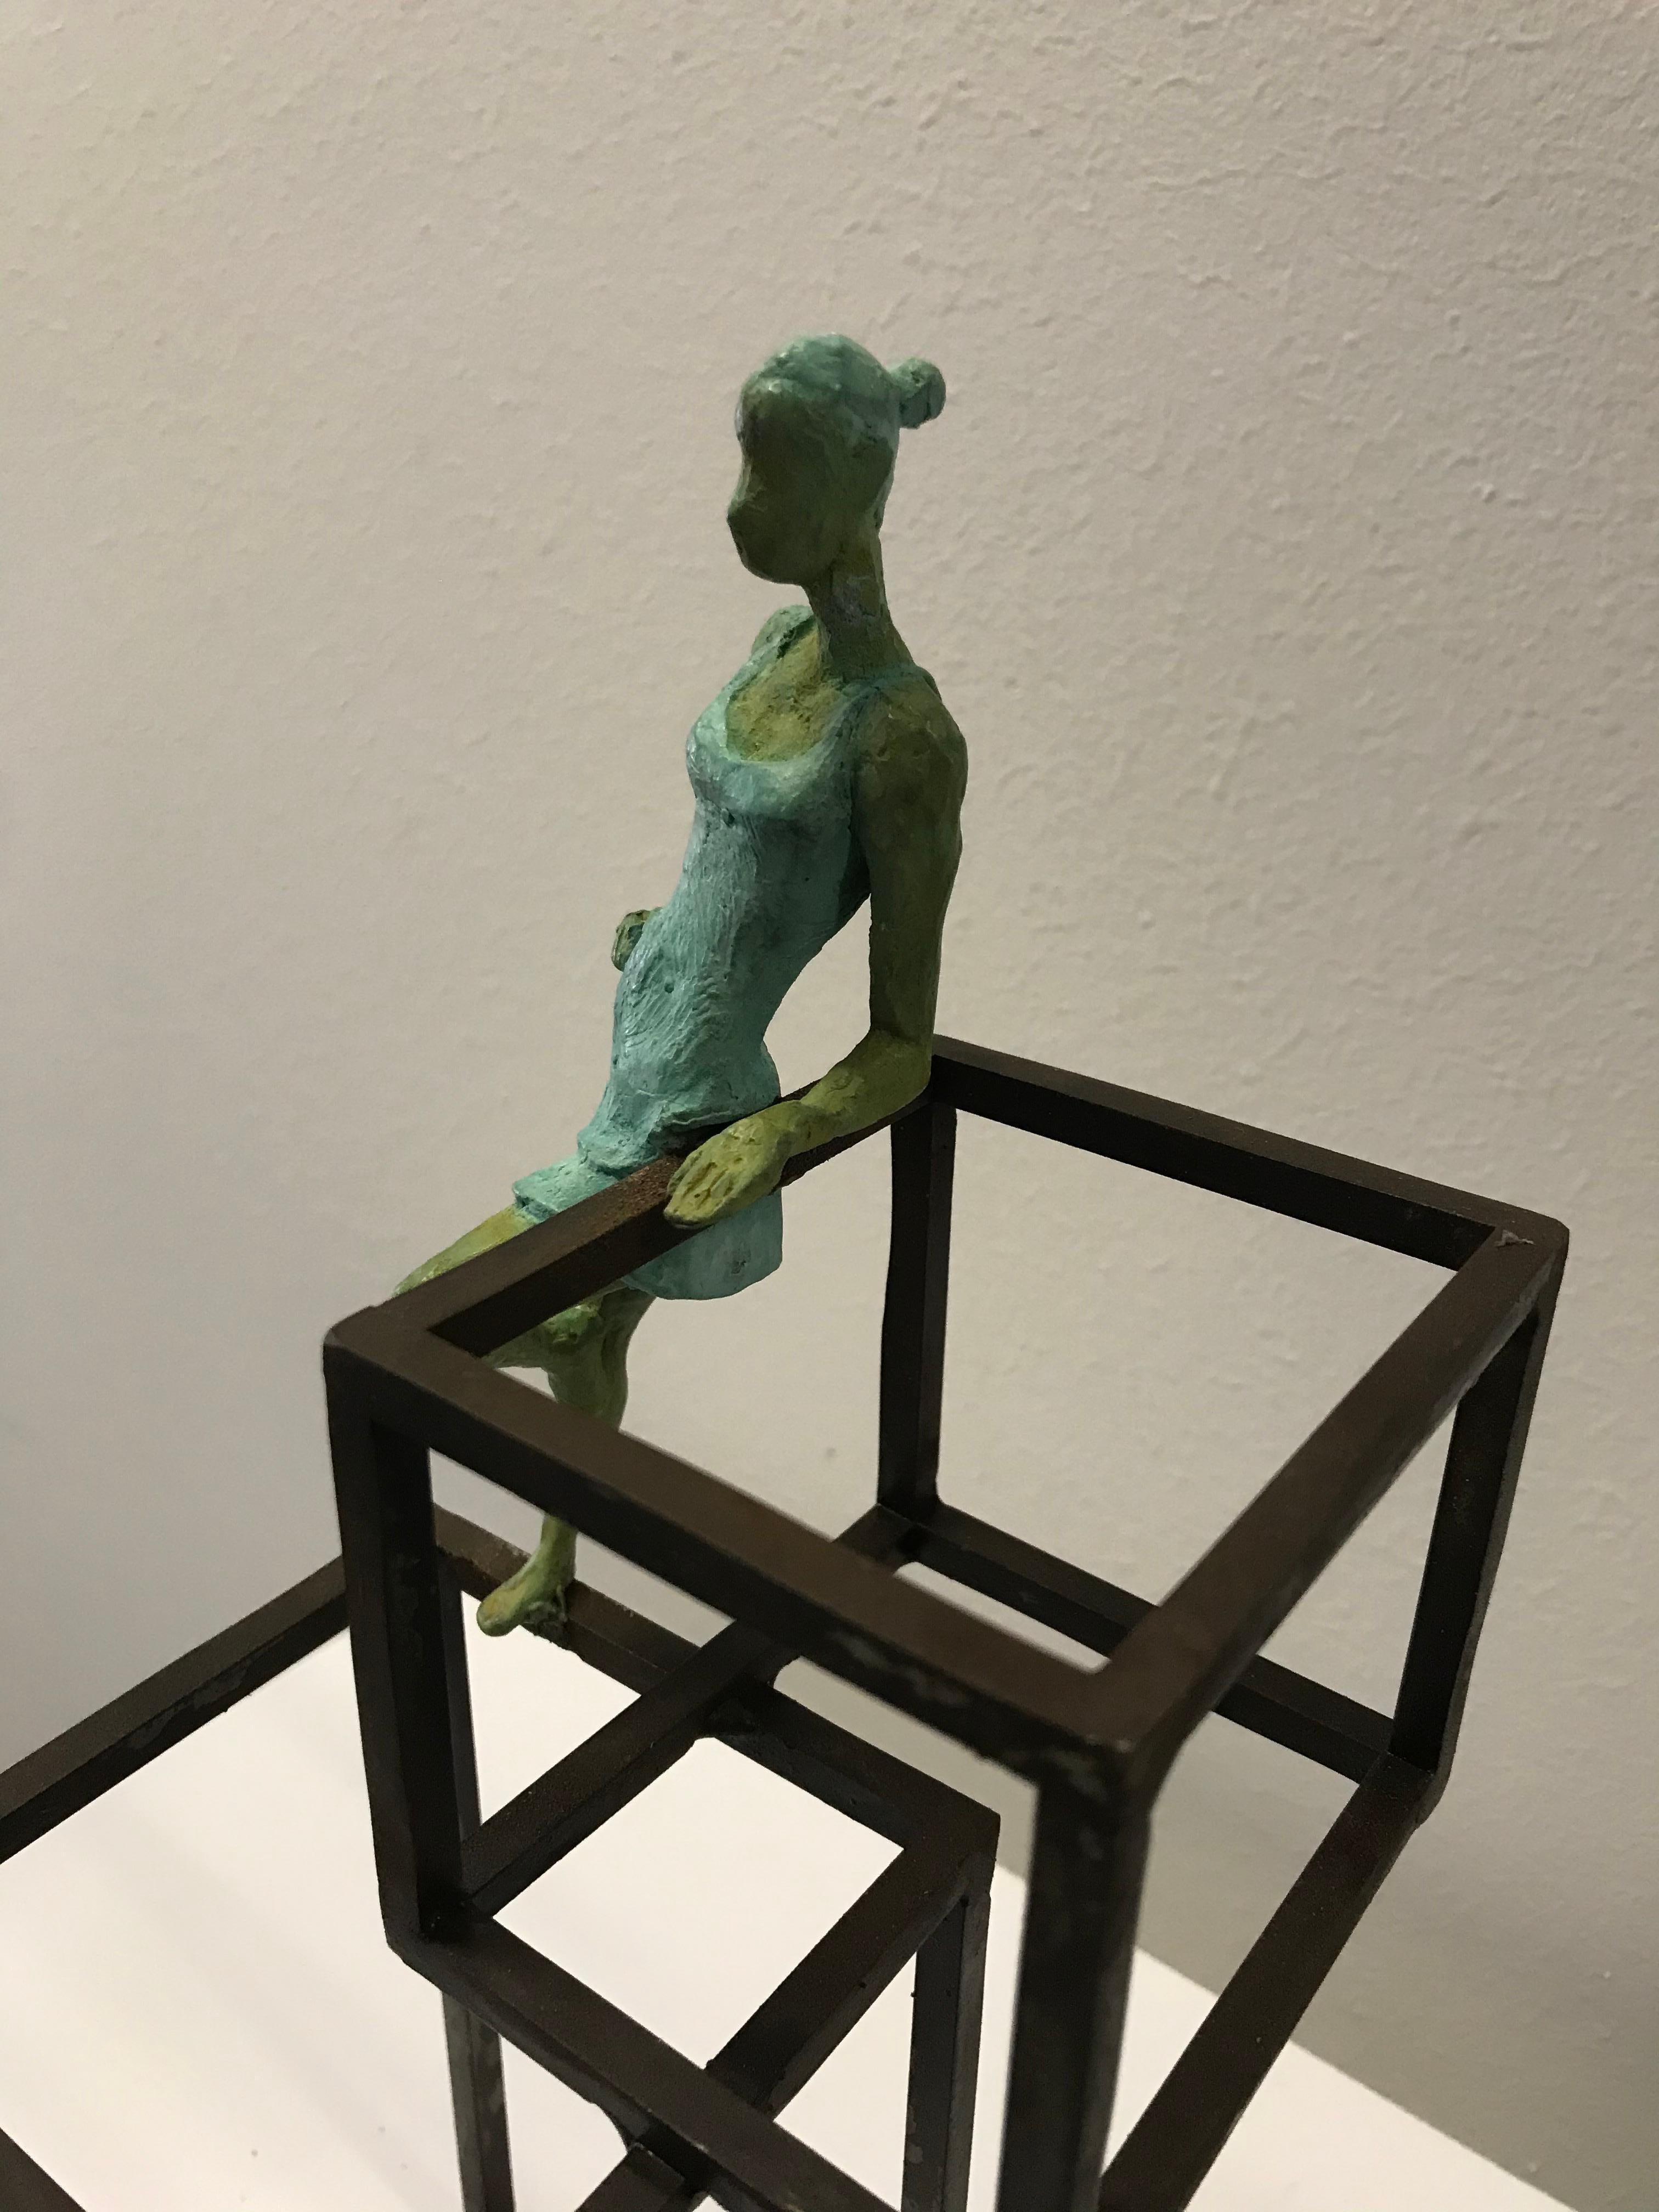 Cuba Cube III is a bronze sculpture with green patina, it is connected to a steel base. The edition size is 50. This sculpture stands on shelf as well as be hung on wall.  This sculpture is part of the Cuba Series of Joan Artigas which is inspired